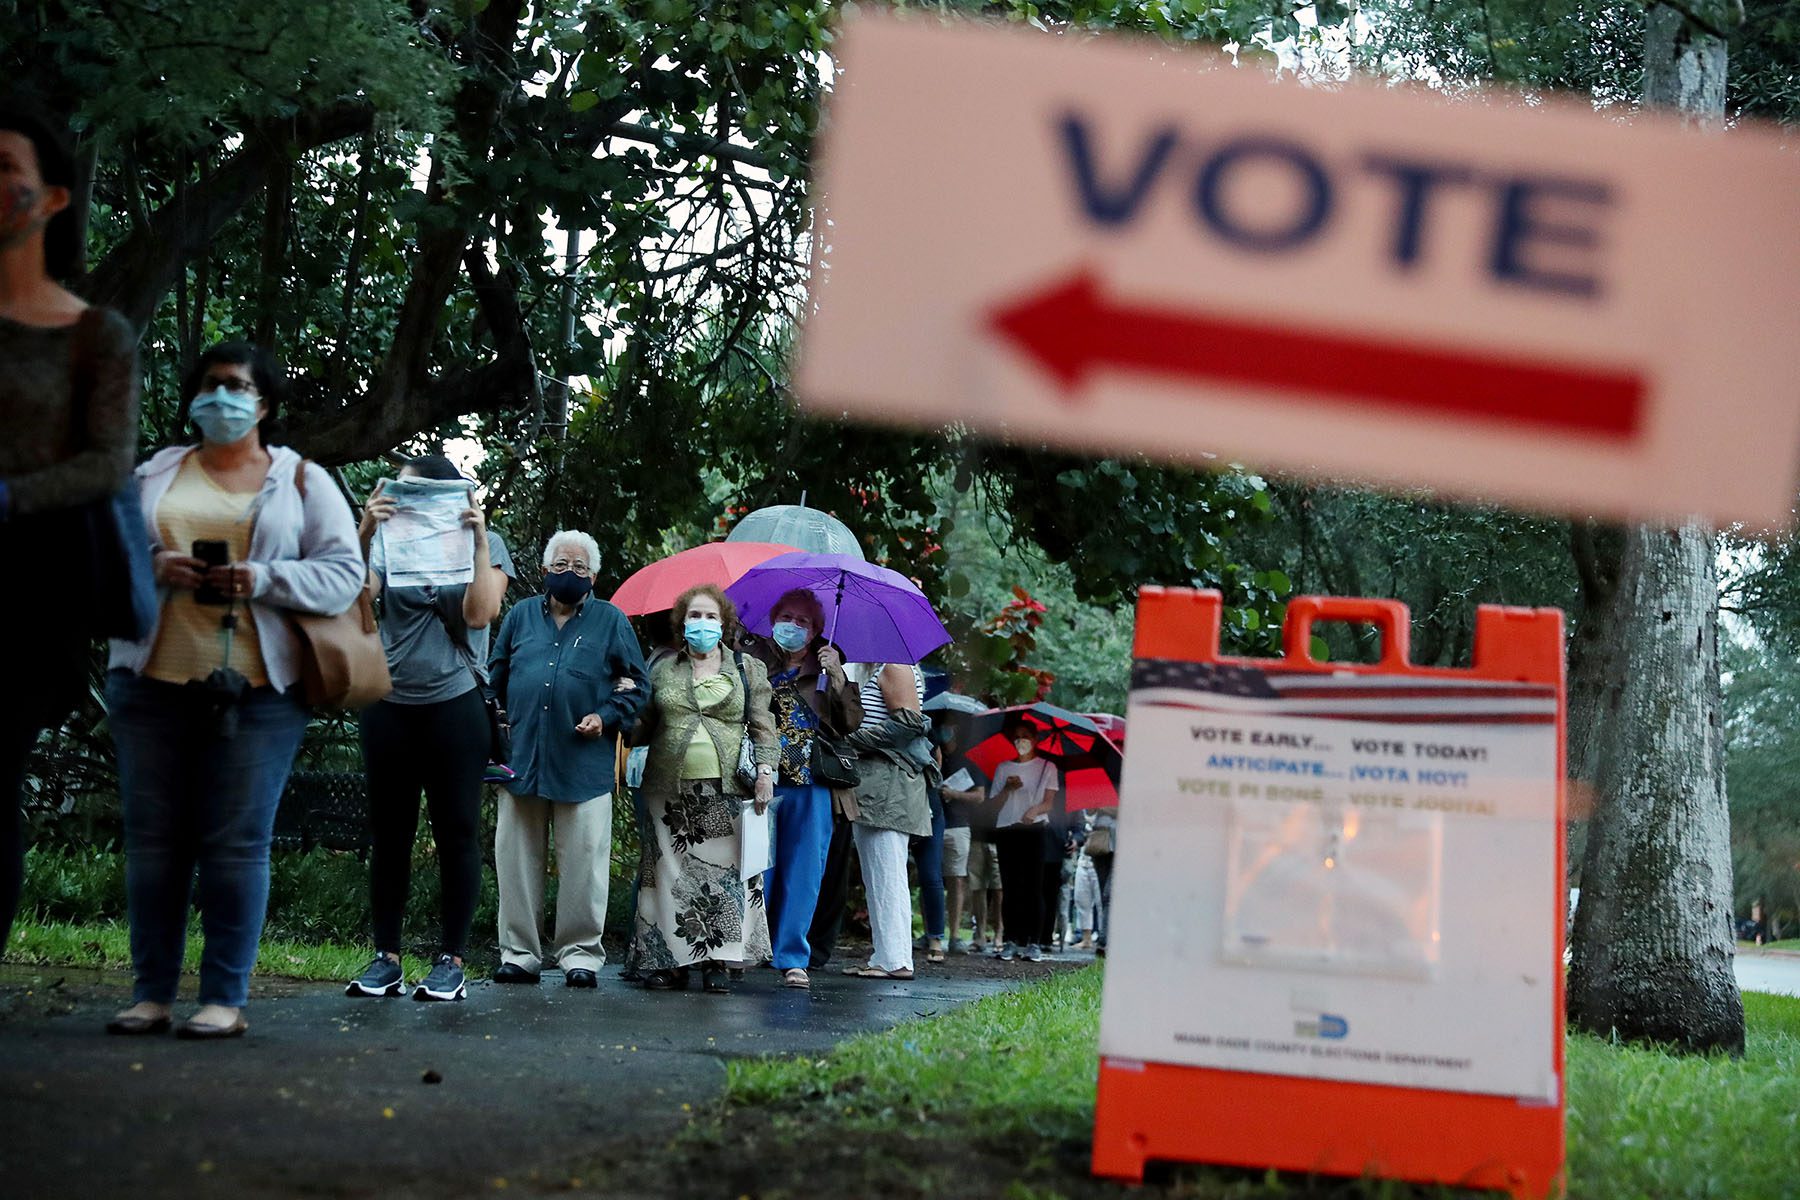 Voters wait in line to cast their ballots on a rainy florida morning. Several people in line are holding umbrellas and wearing face masks. A "vote" sign is seen blurred in the foreground.